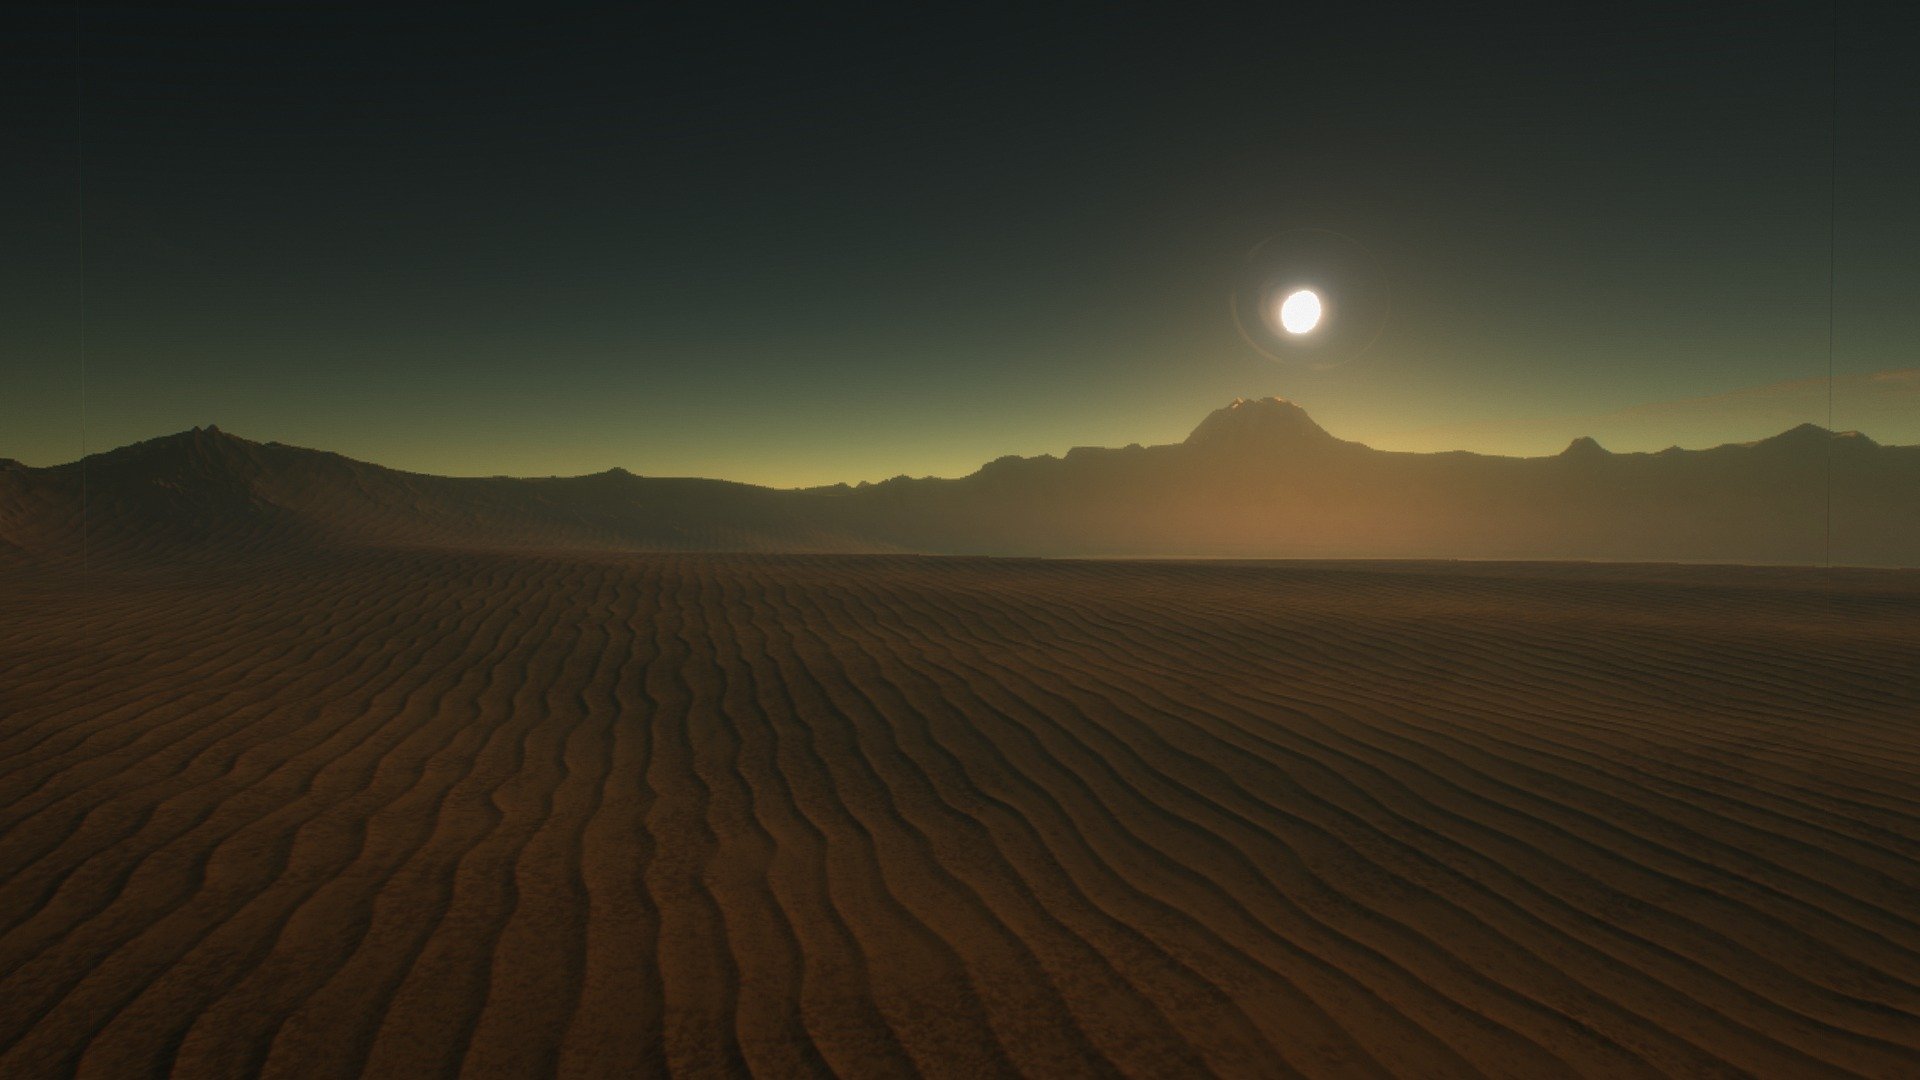 Just a simple skybox I made in Space Engine.
1K squared each side, game ready (Source Engine).

Download here: http://gamebanana.com/textures/4390

Video here: https://www.youtube.com/watch?v=g5NBn6EwCoY - Mars-like planet skybox - 3D model by Kosan (@megakosan) 3d model